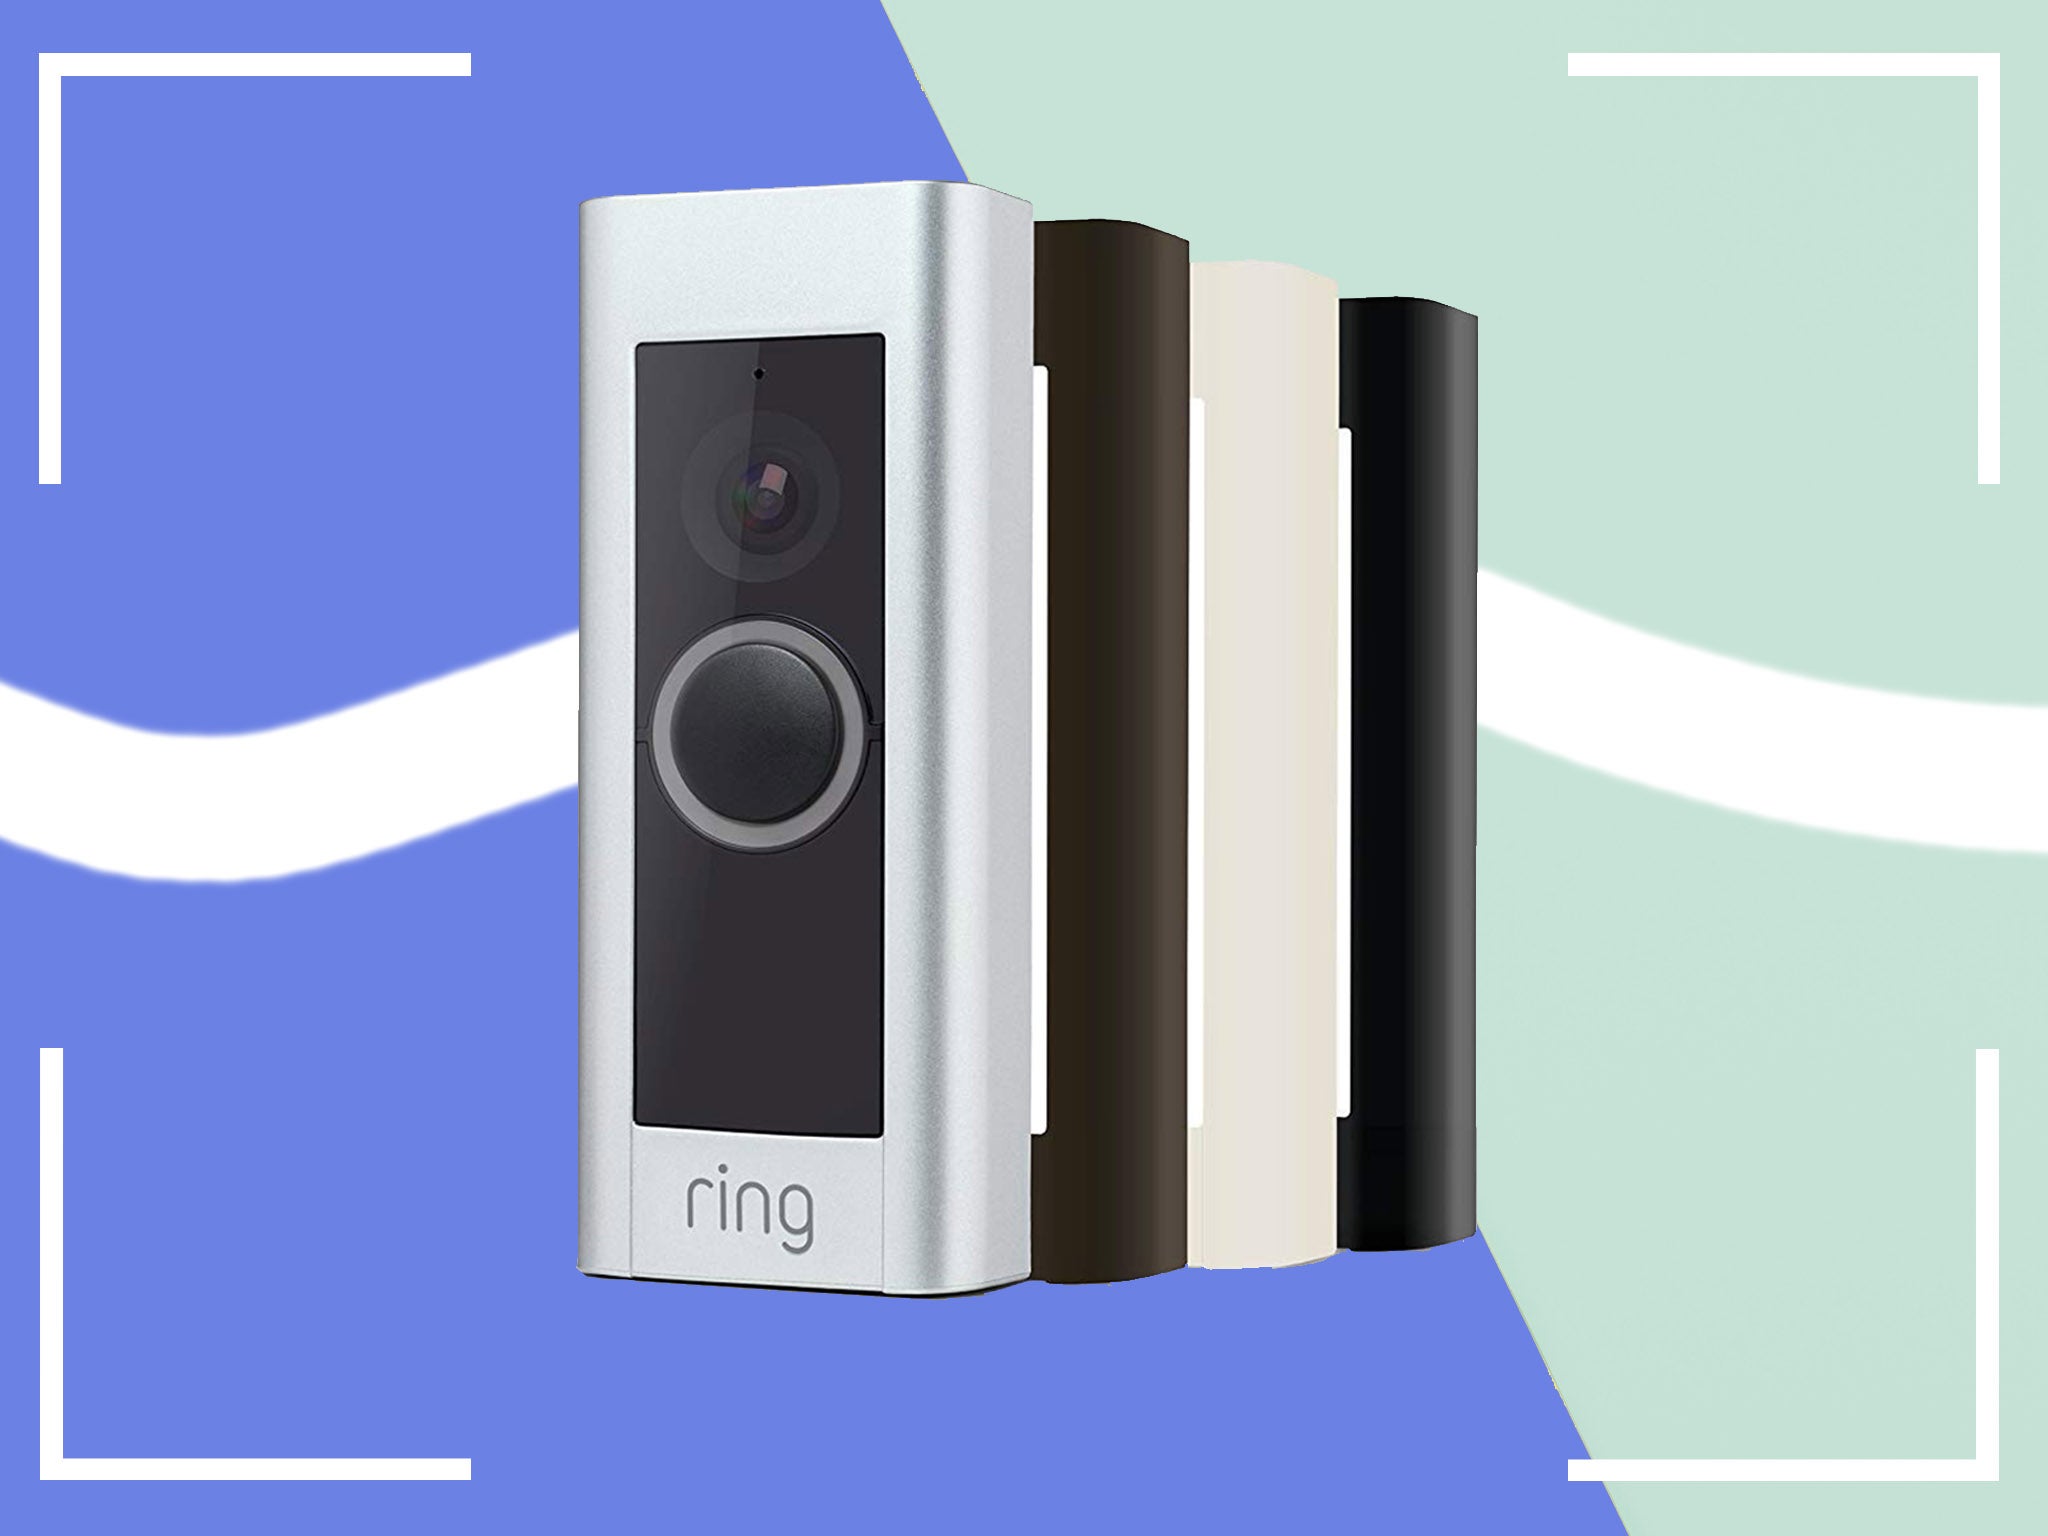 Whether you’re upstairs or away, it’s a great gadget for seeing who is at your door